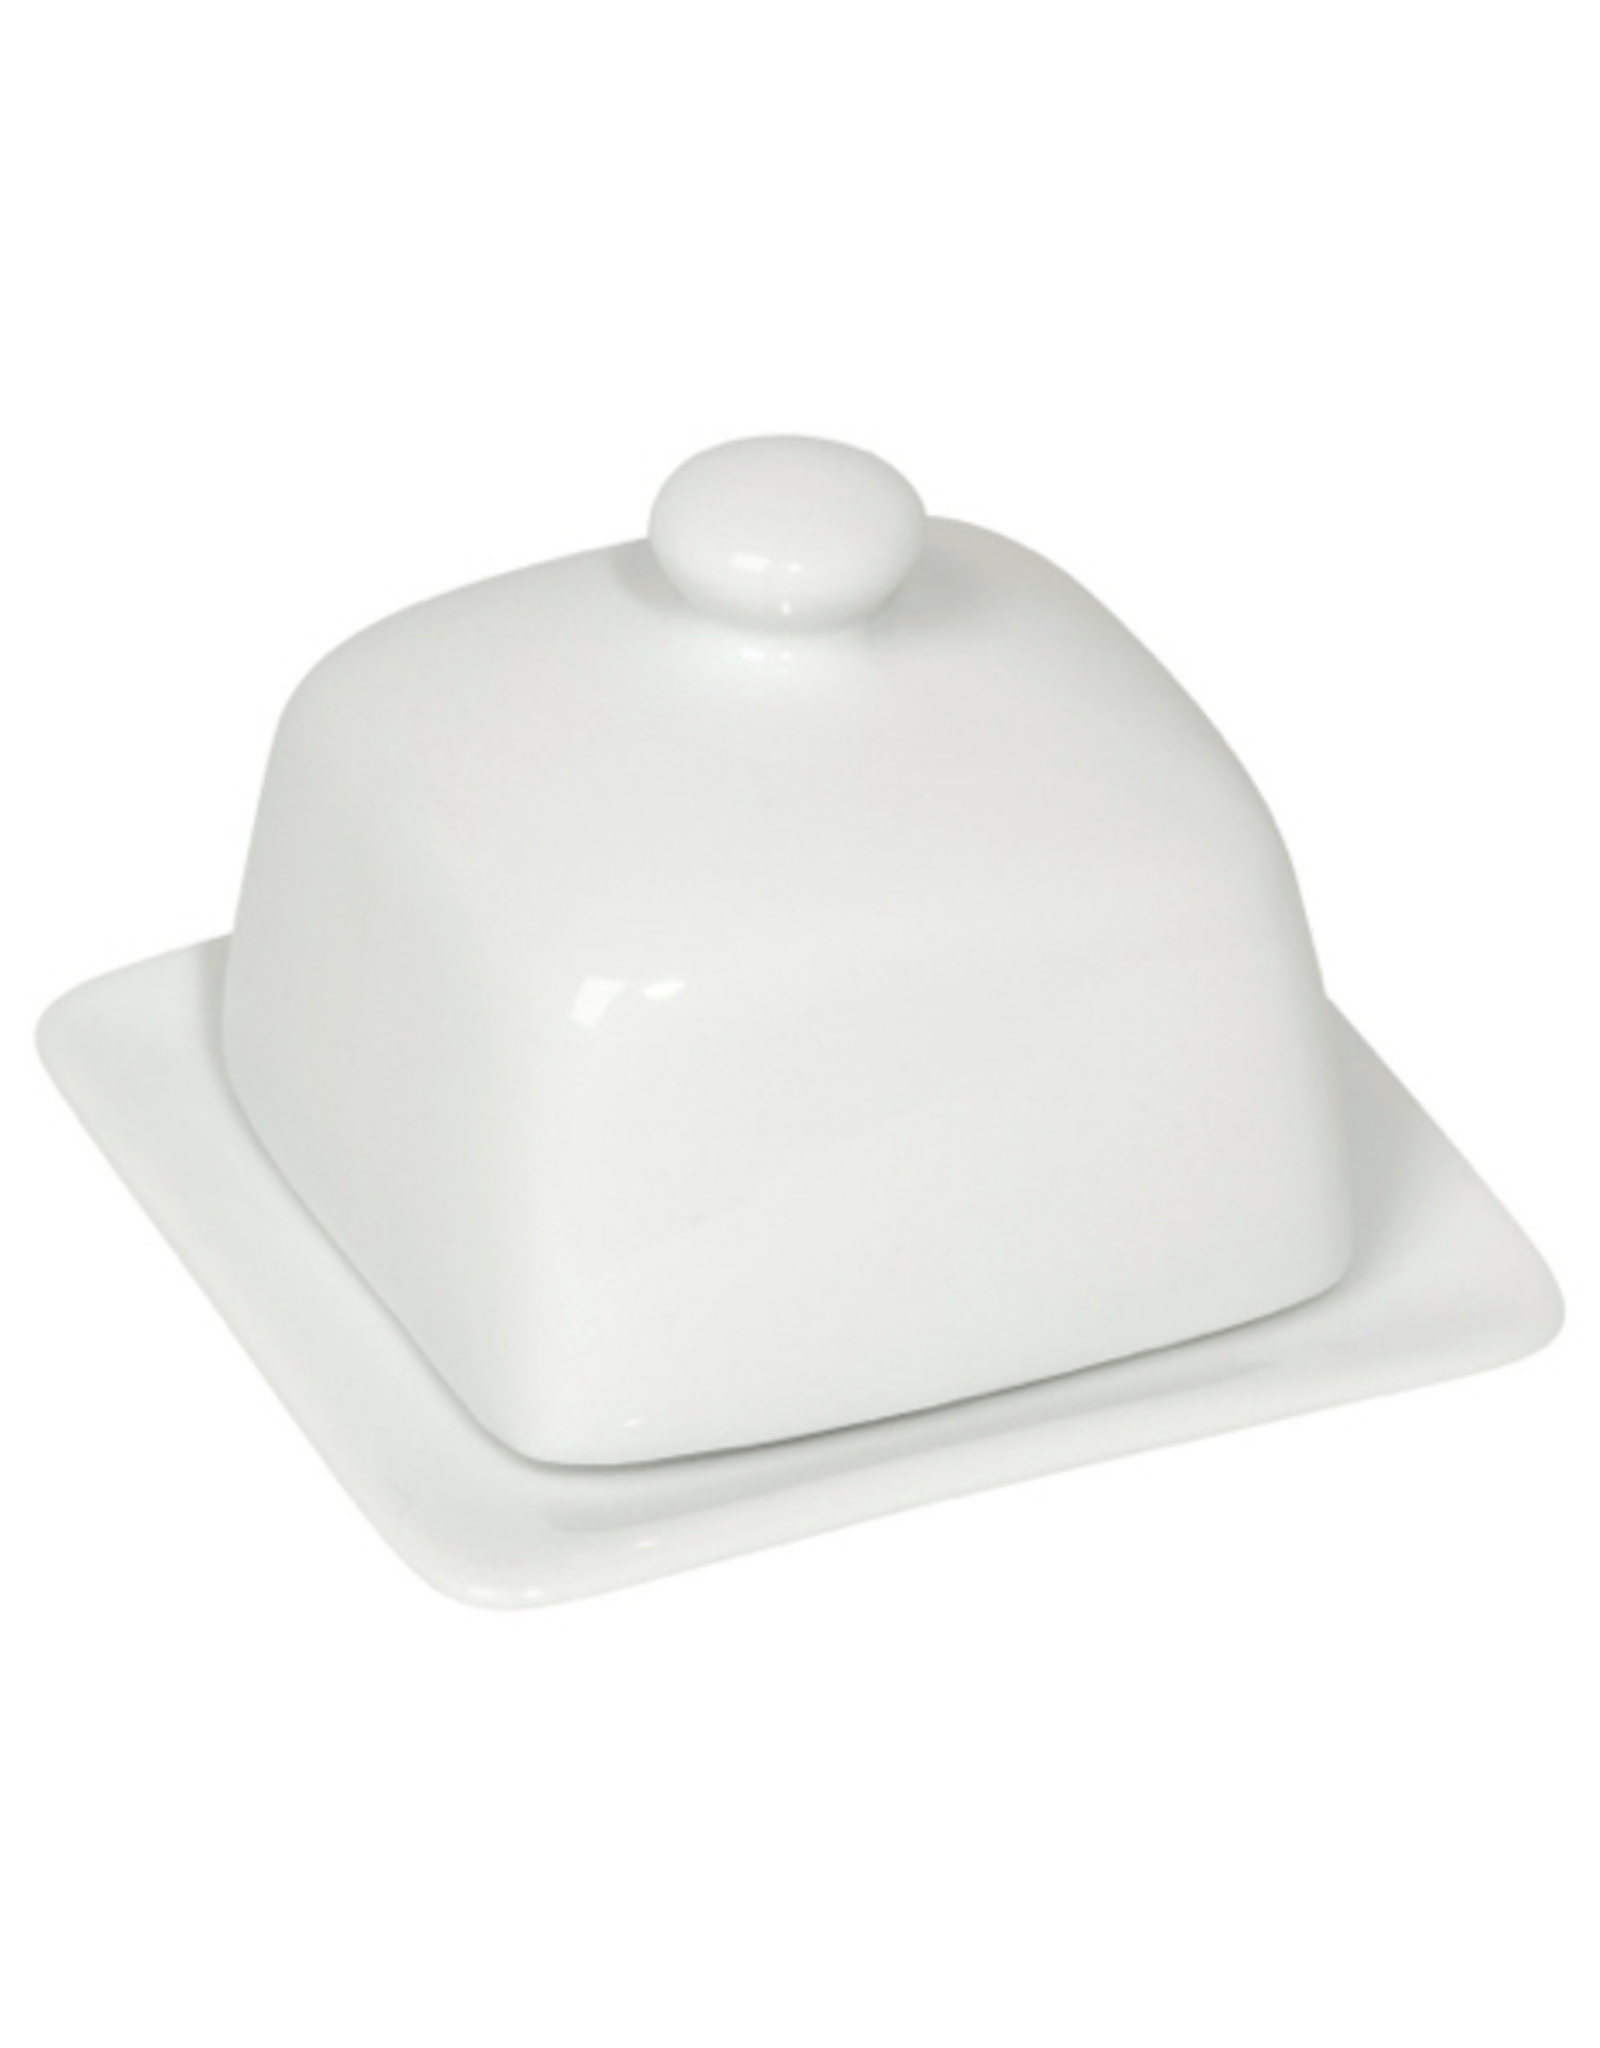 DCA - Butter Dish /  Square, White